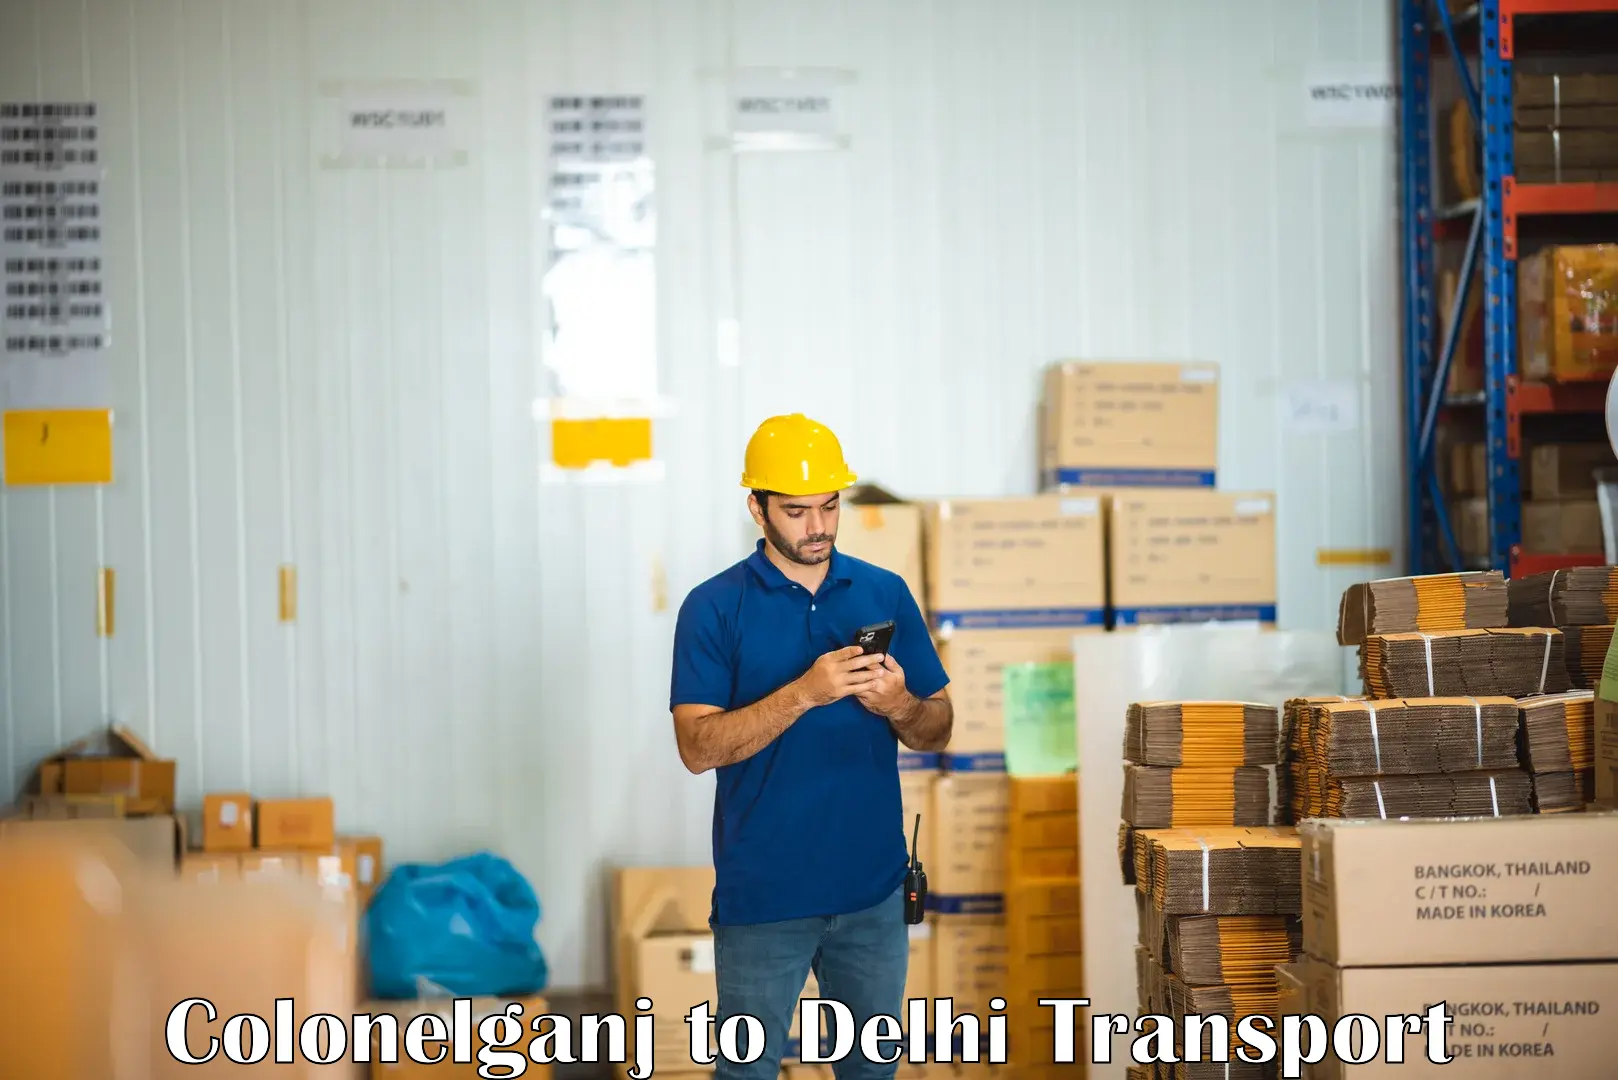 Daily parcel service transport Colonelganj to NCR